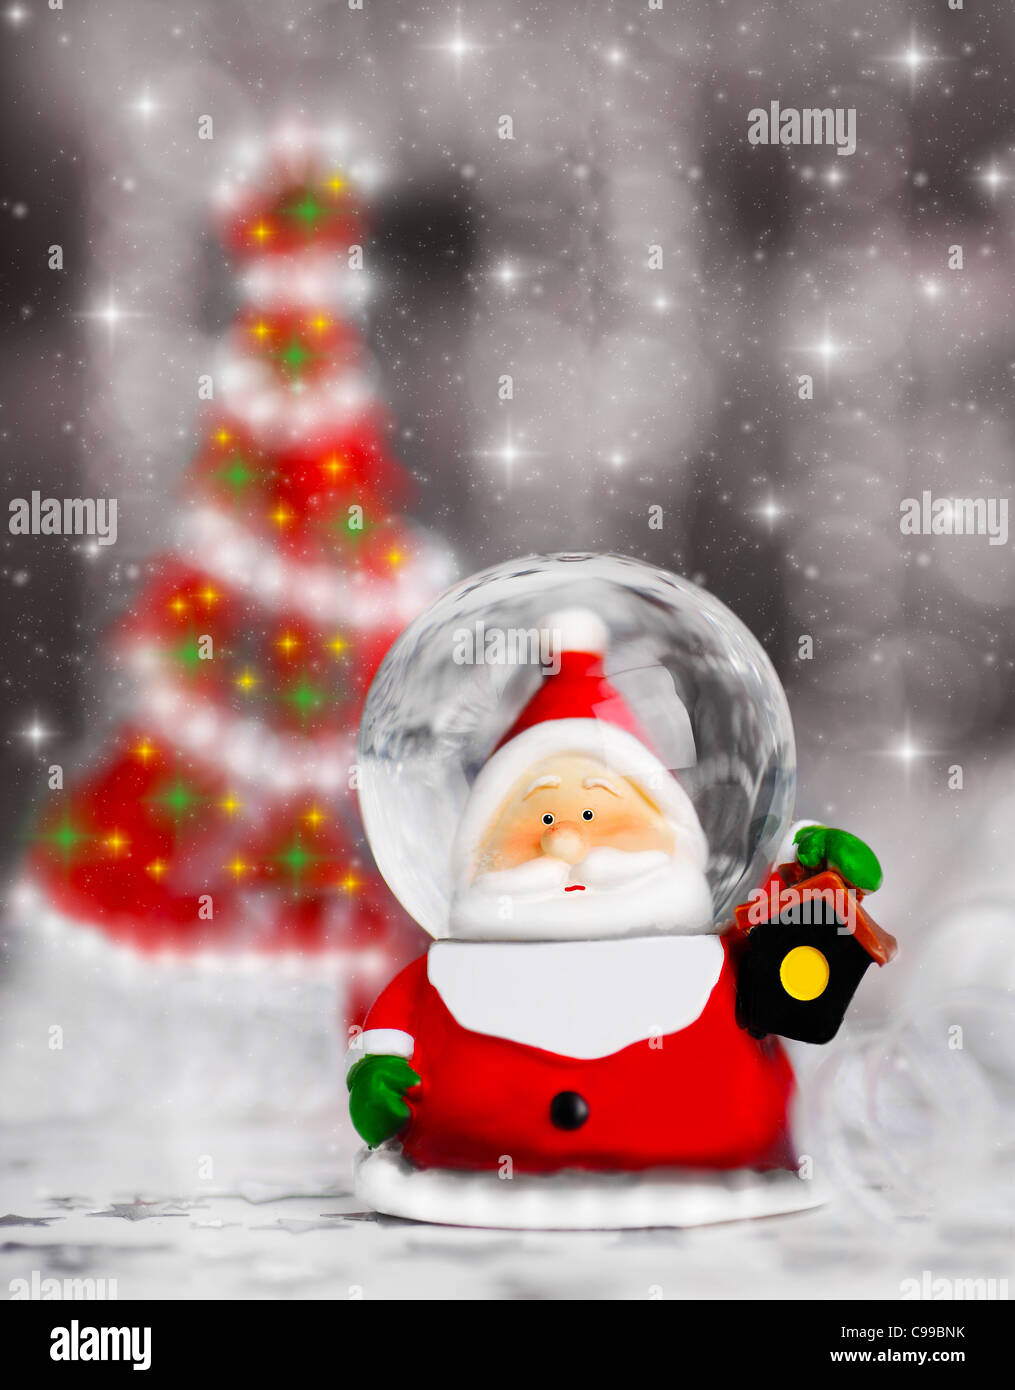 Snow globe Santa Claus, Christmas tree decoration, traditional winter holiday ornament with shiny blur lights background, select Stock Photo